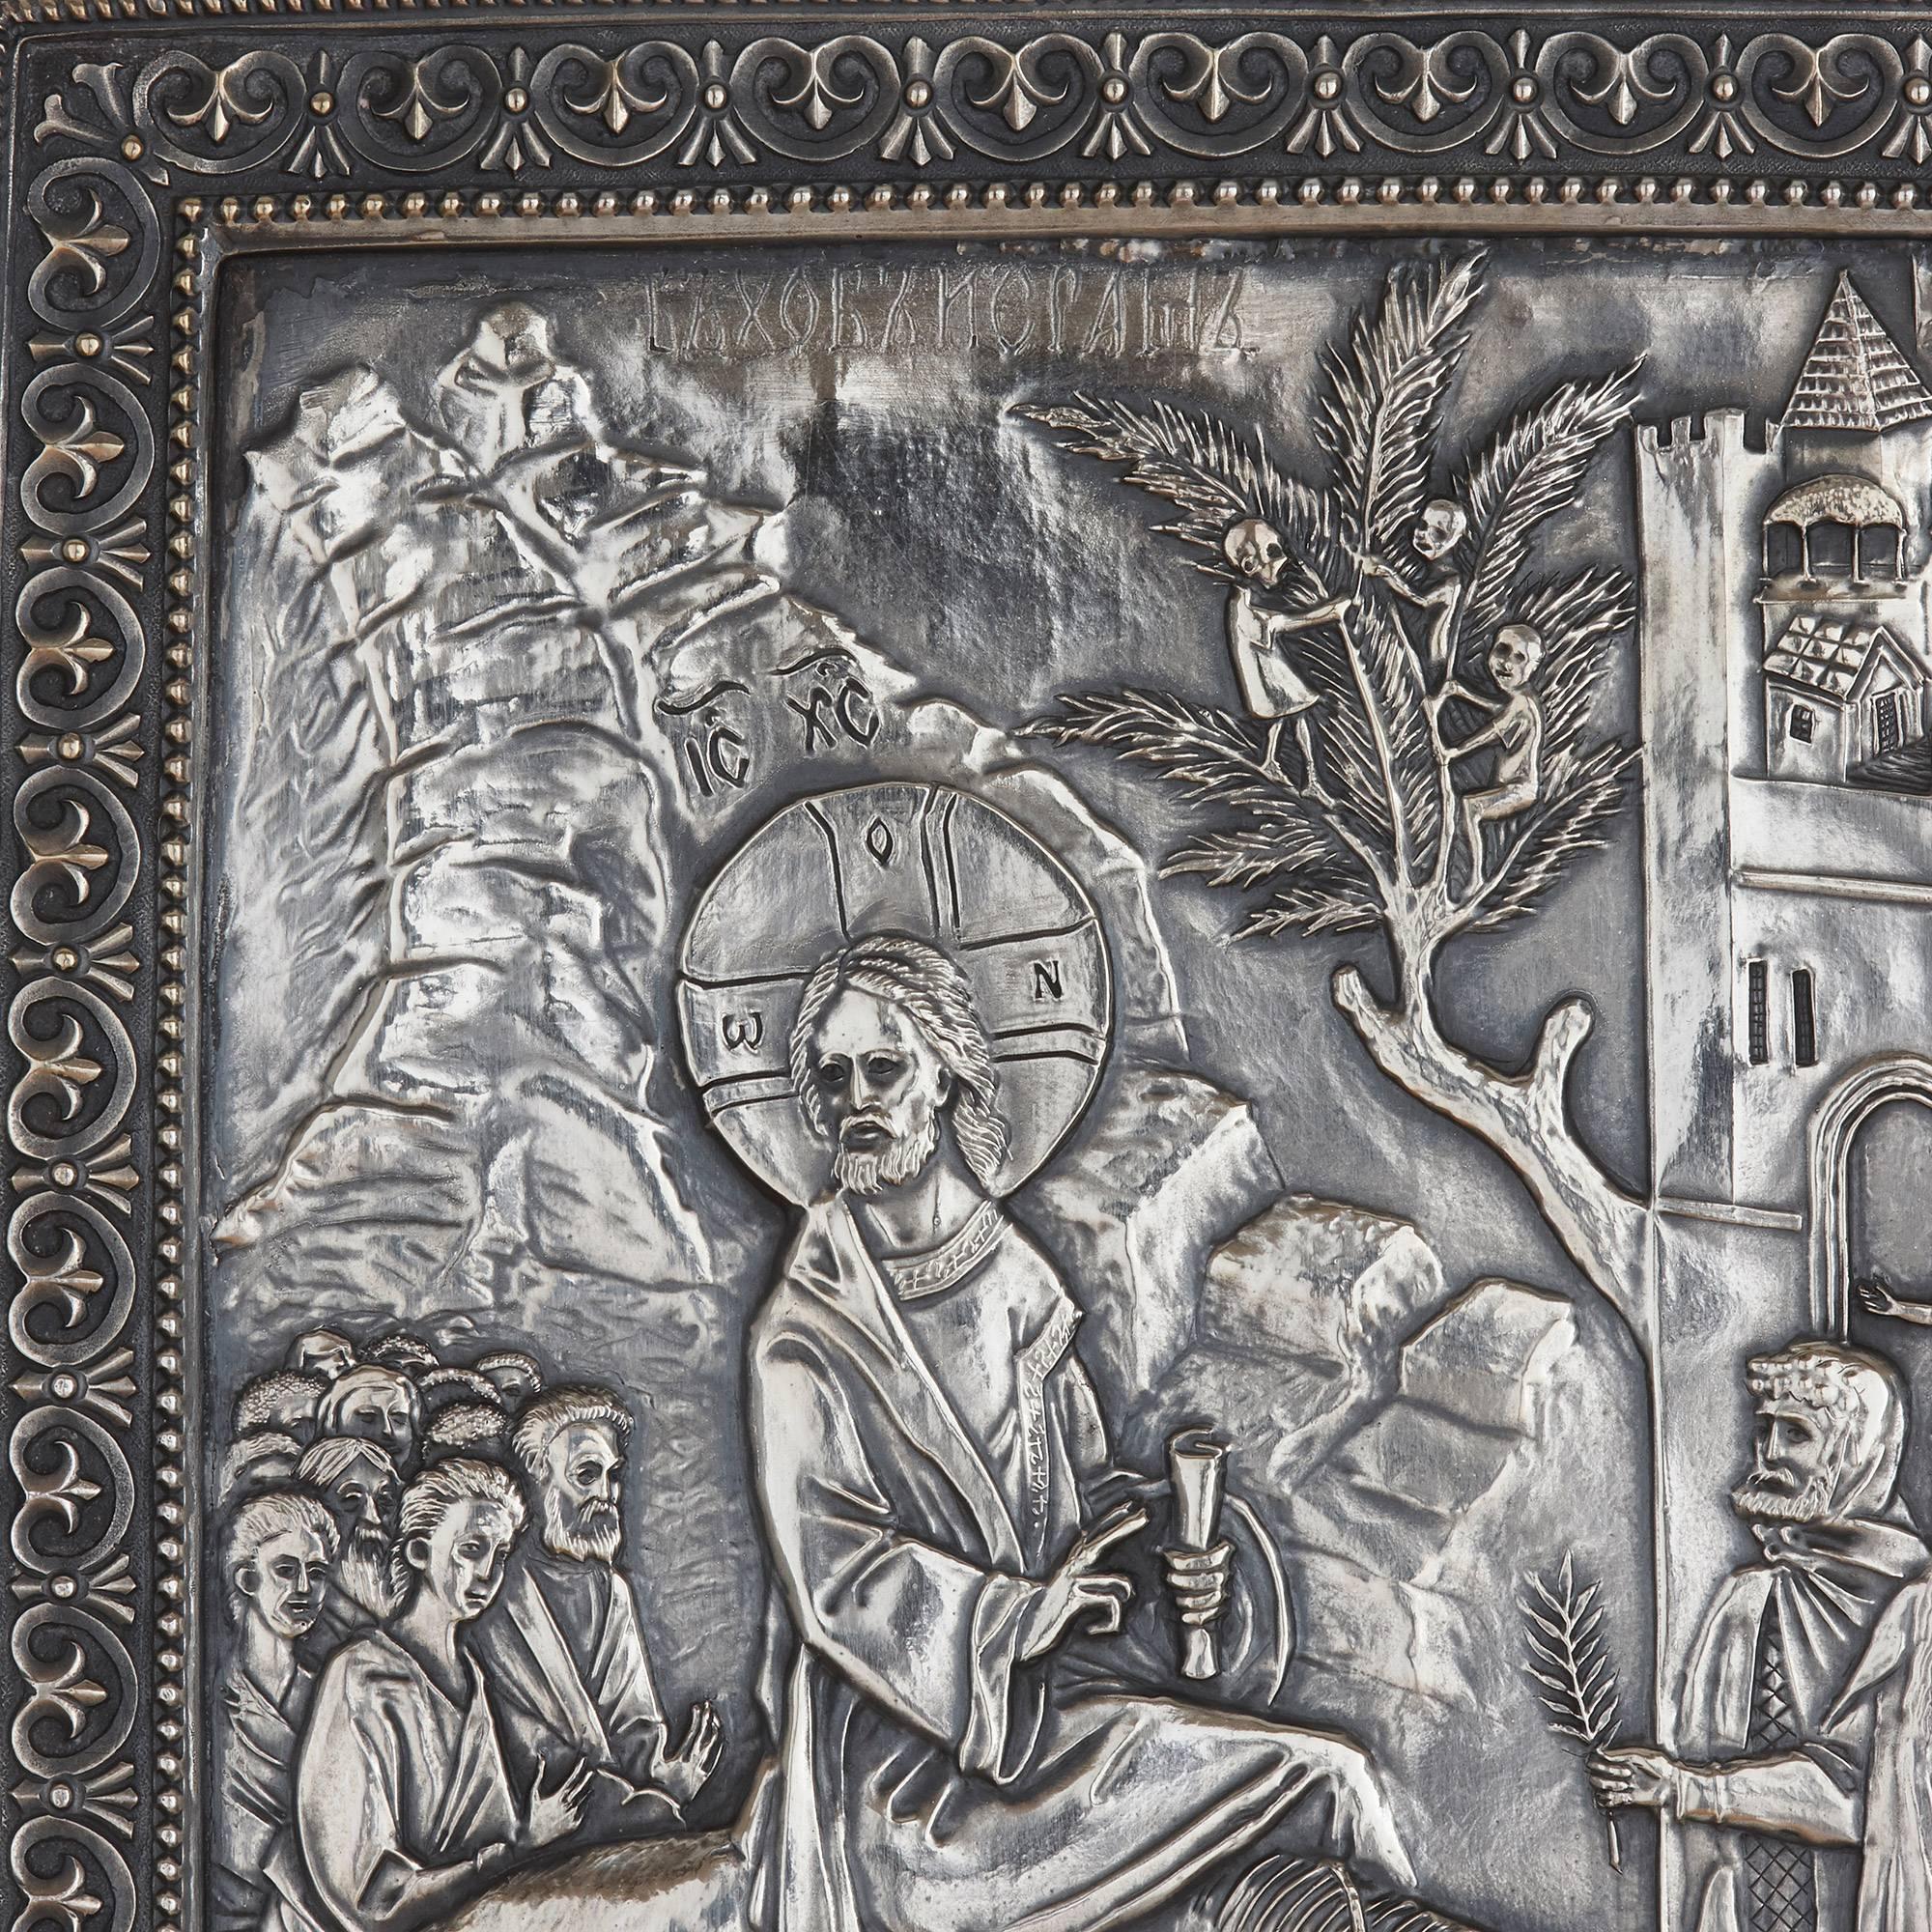 Of rectangular shape, the silver moulded to depict the iconic Biblical scene.

This exquisite Russian silver icon, depicting the famous moment of Christ's entry into Jerusalem on a donkey, is a truly precious work of art.